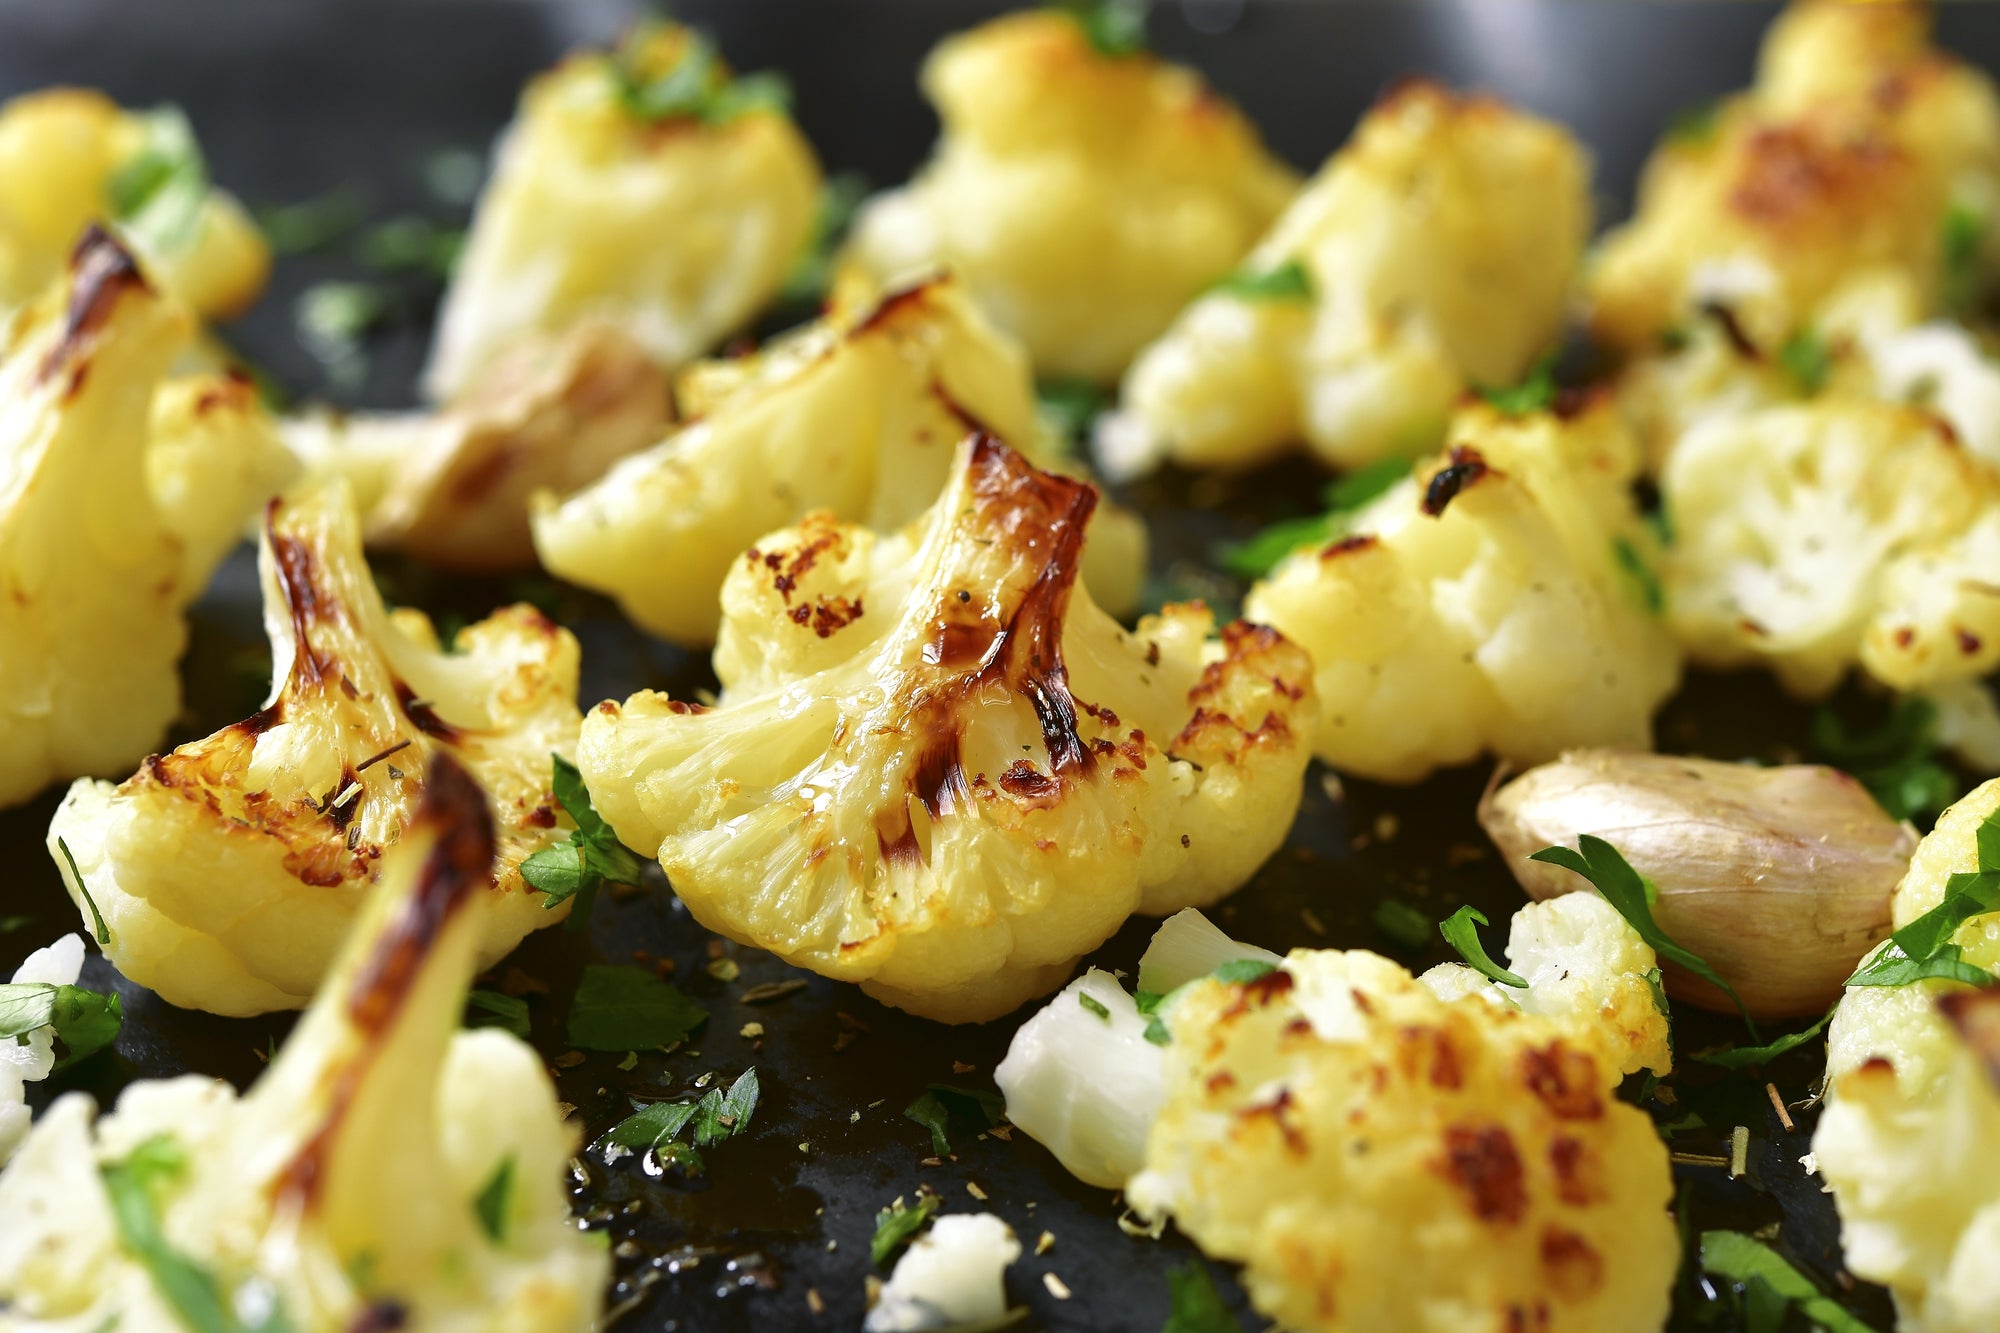 close-up shot of roasted cauliflowers sprinkled with chopped green herbs in a pan.